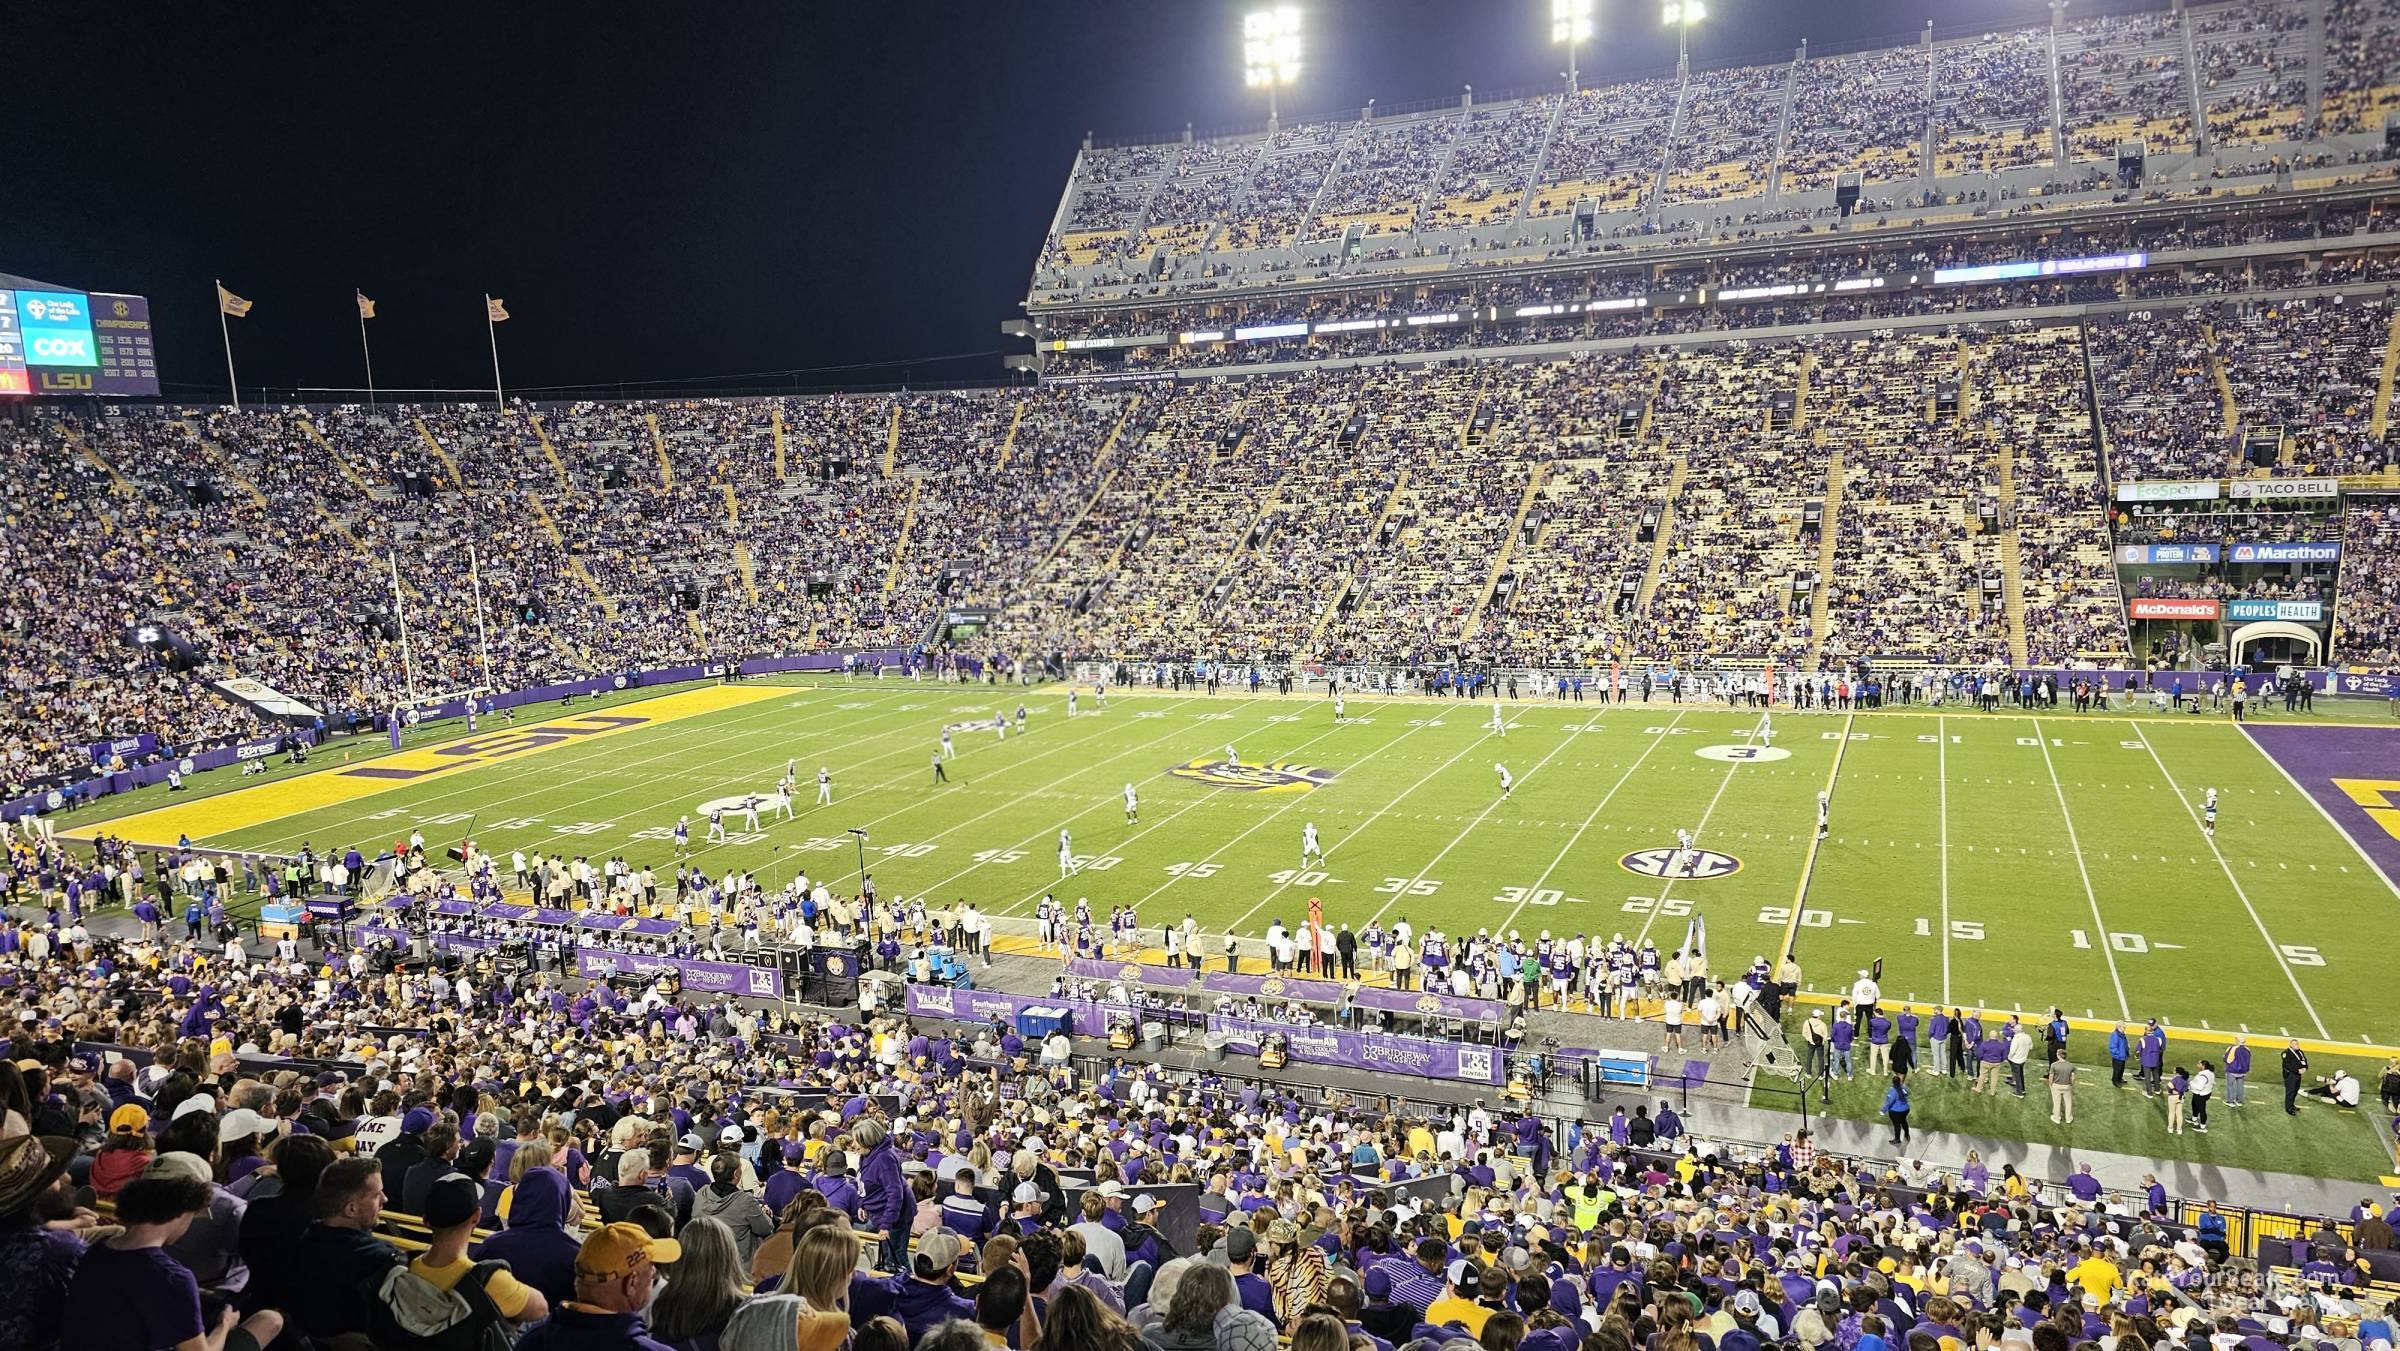 section 101, row 48 seat view  - tiger stadium